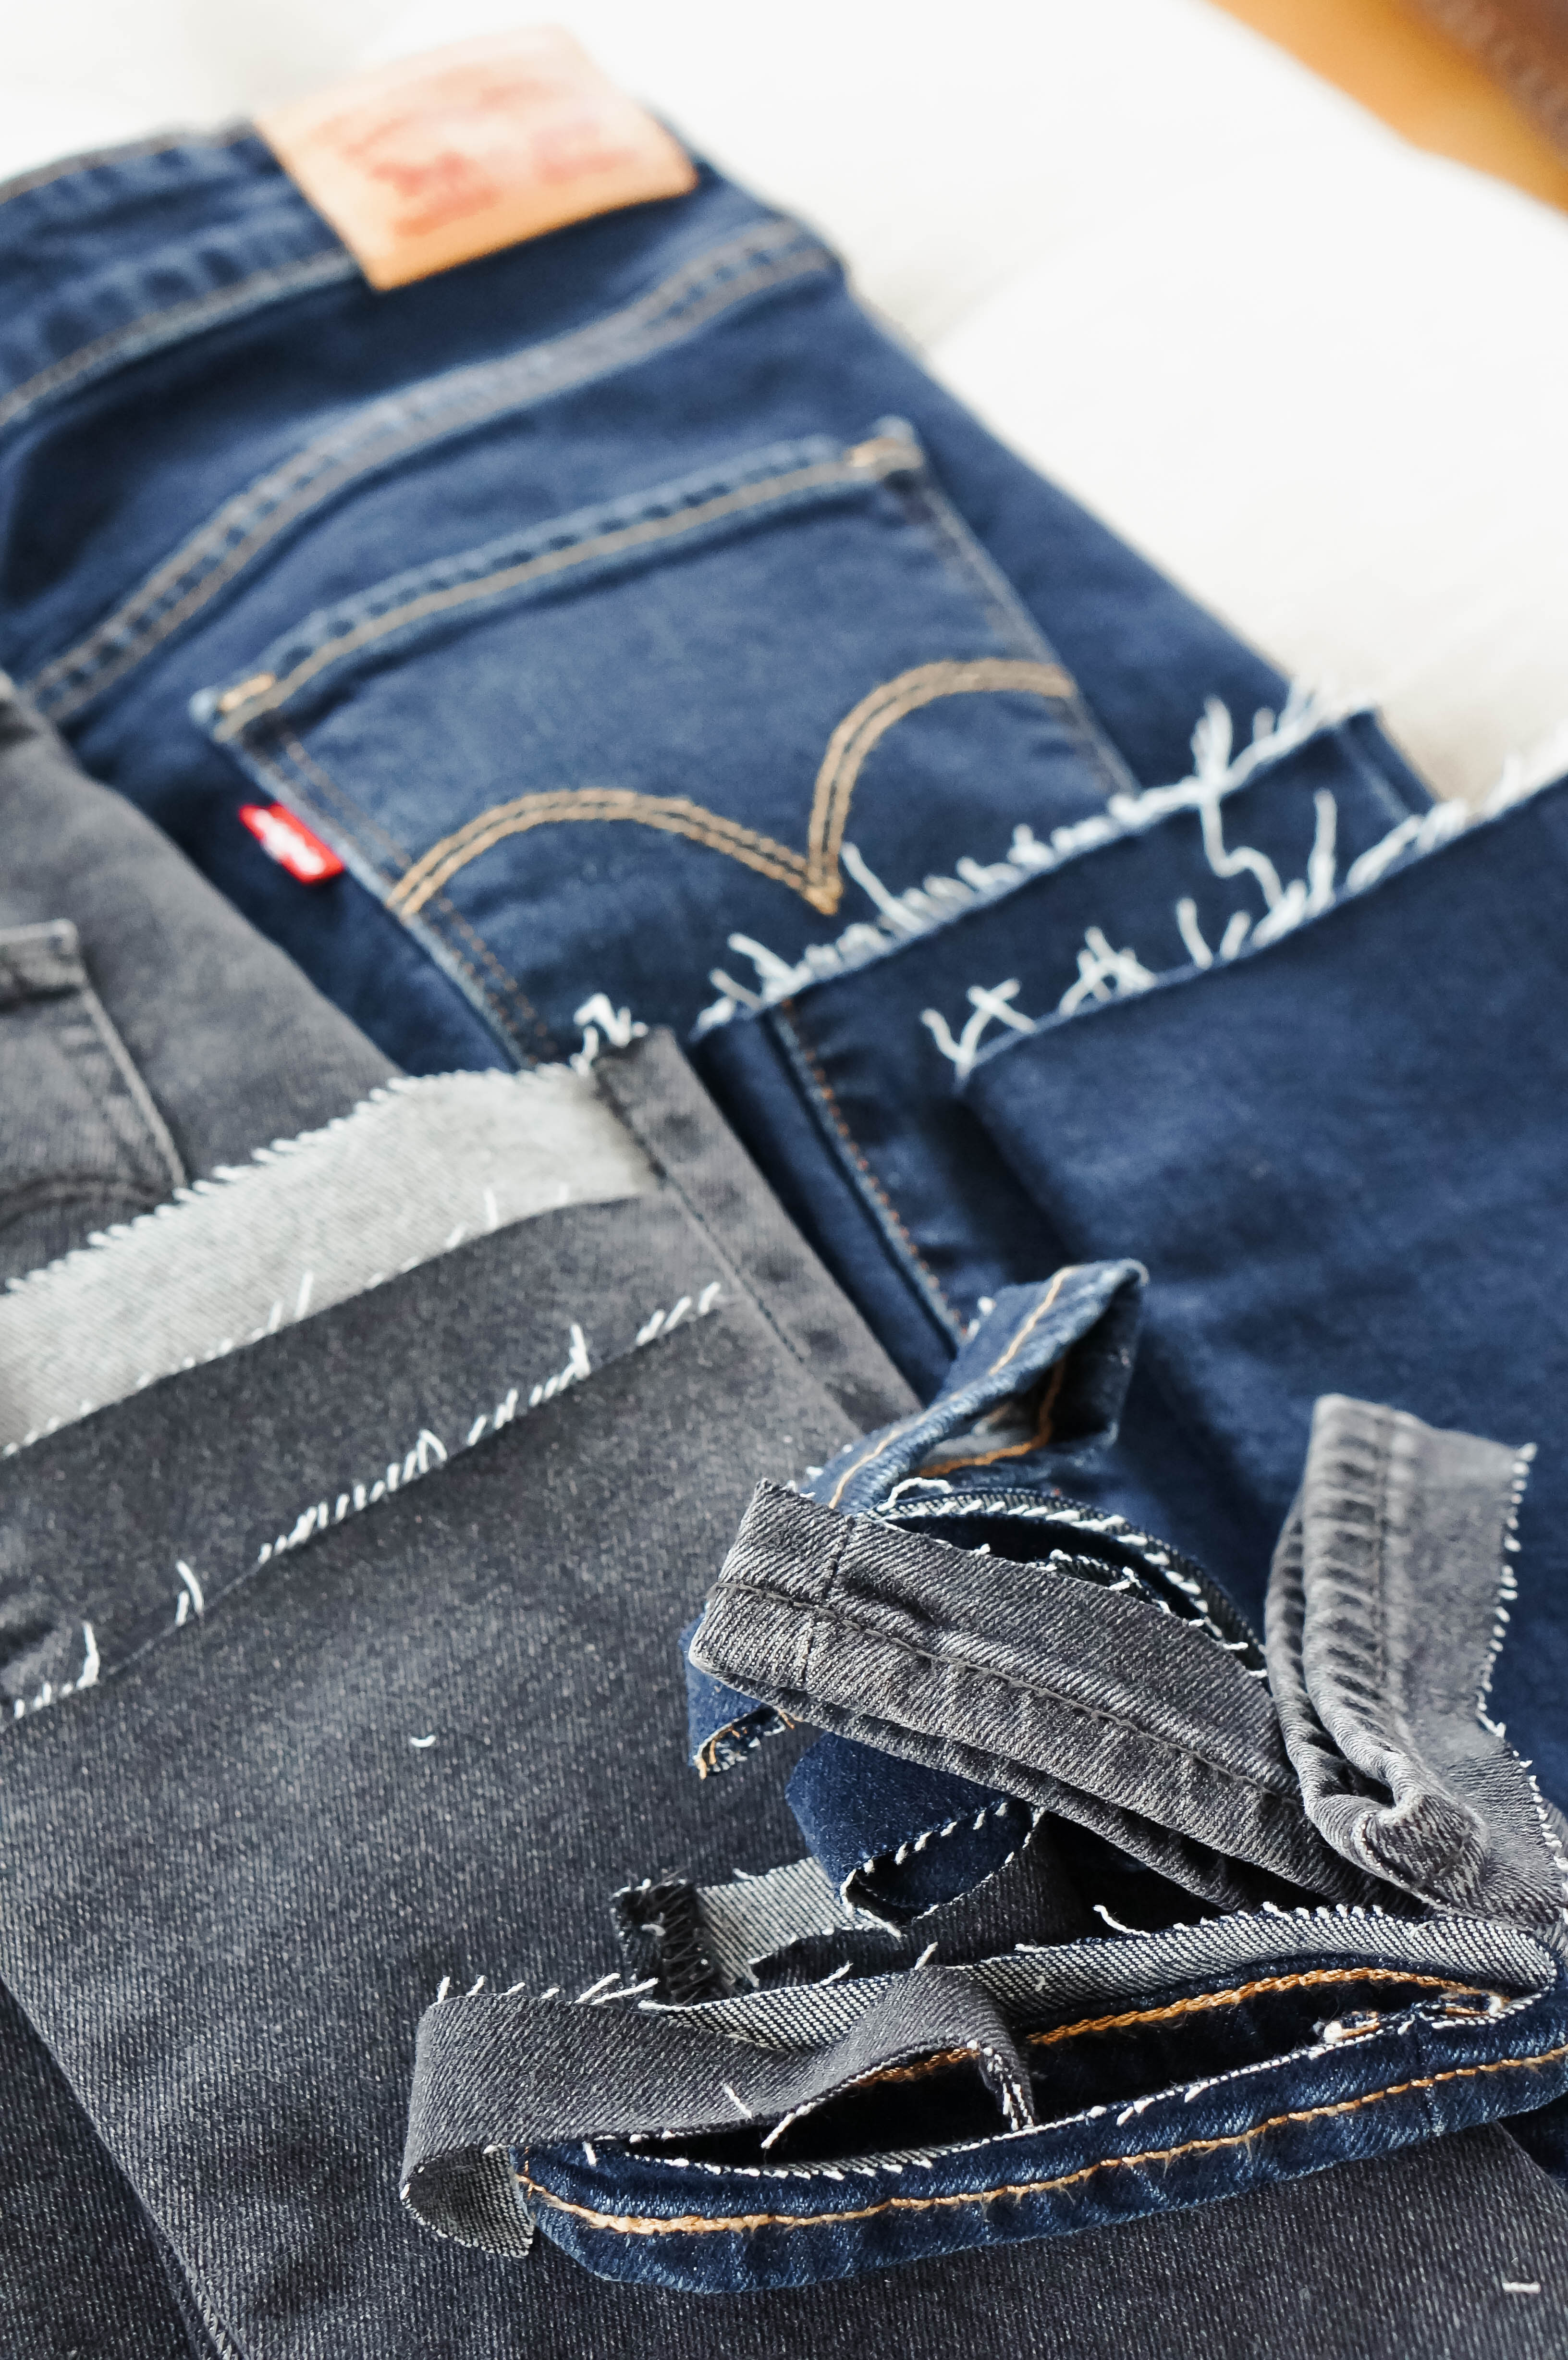 DIY: How To Cut The Hem Off Jeans - Red White & Denim